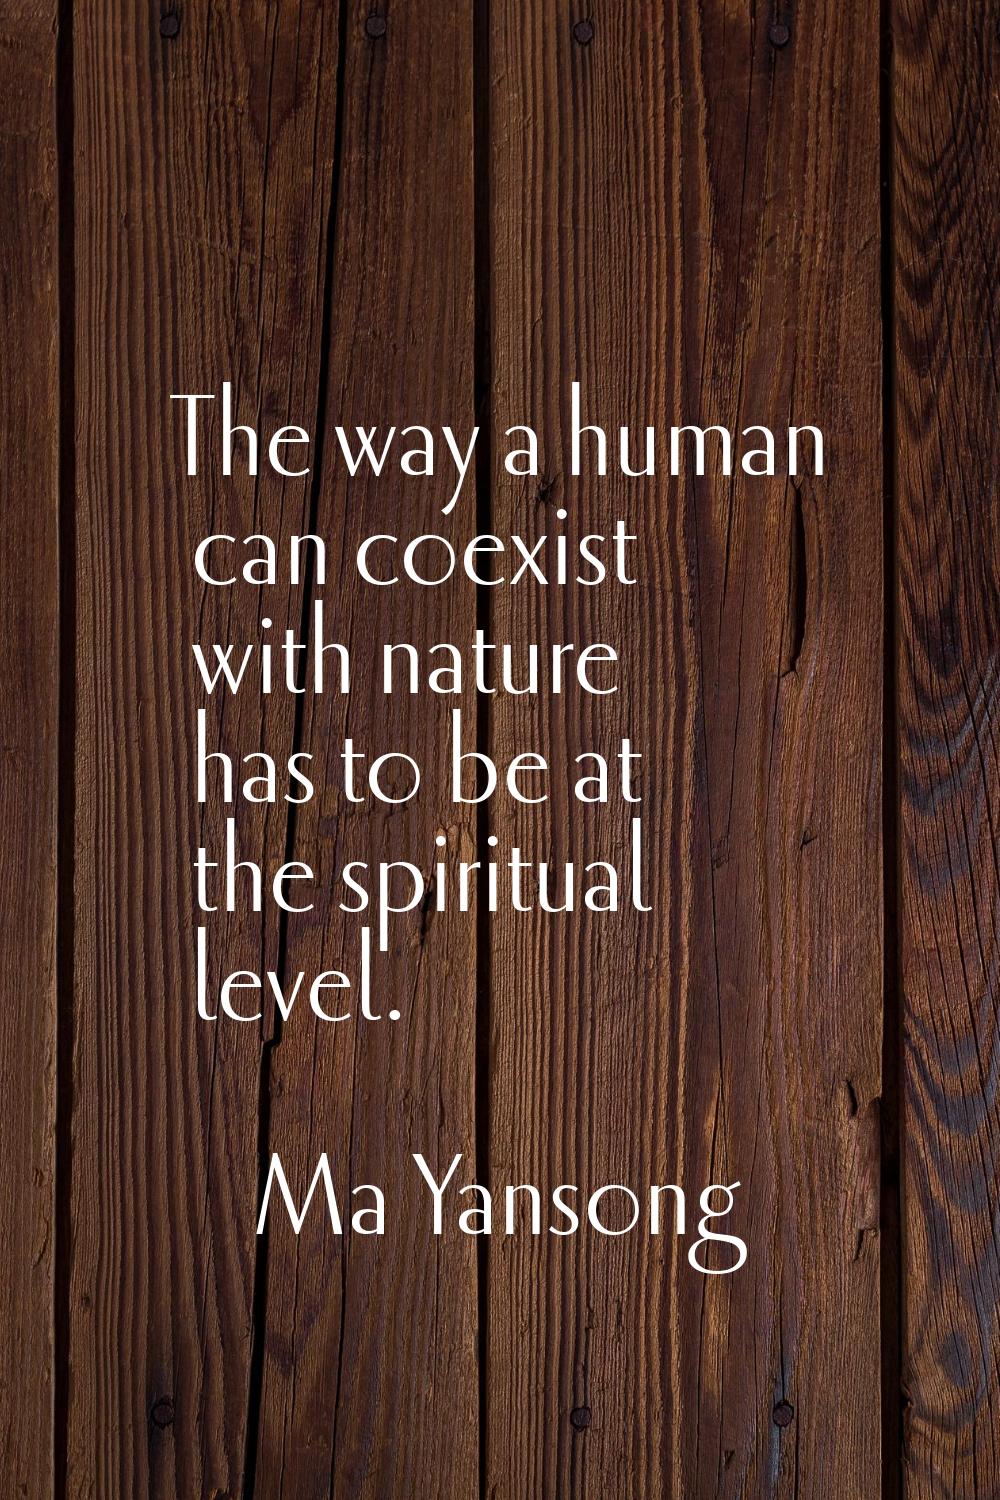 The way a human can coexist with nature has to be at the spiritual level.